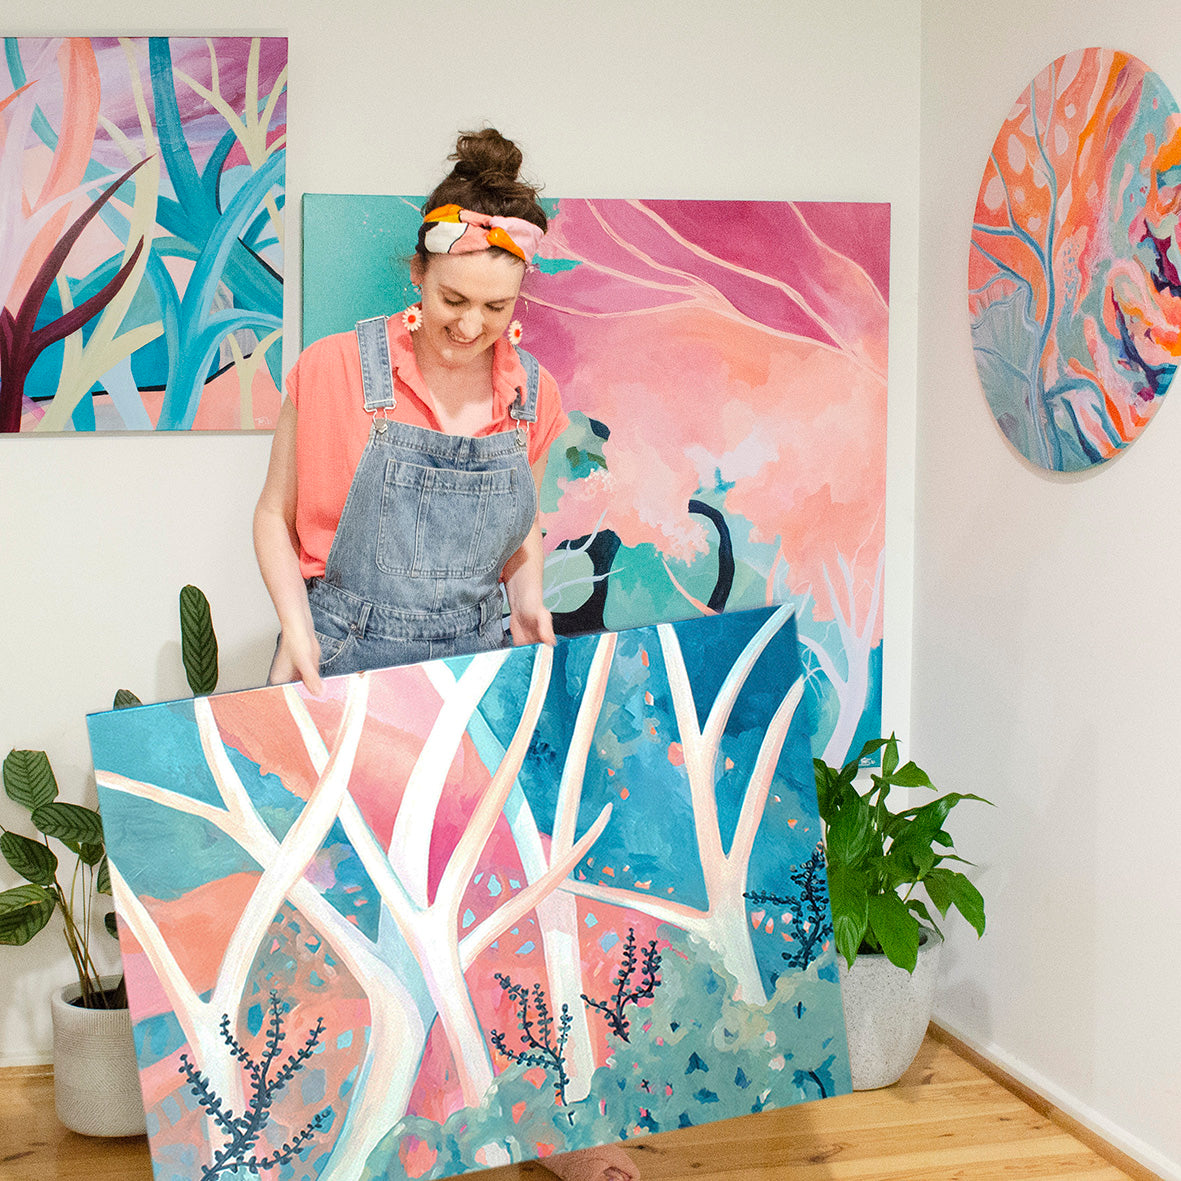 Tessa holding artwork 'a dream I had.'This ia pastel coloured abstract tree painting in her home, Tessa's wearing big flower earrings and a colourful headband.